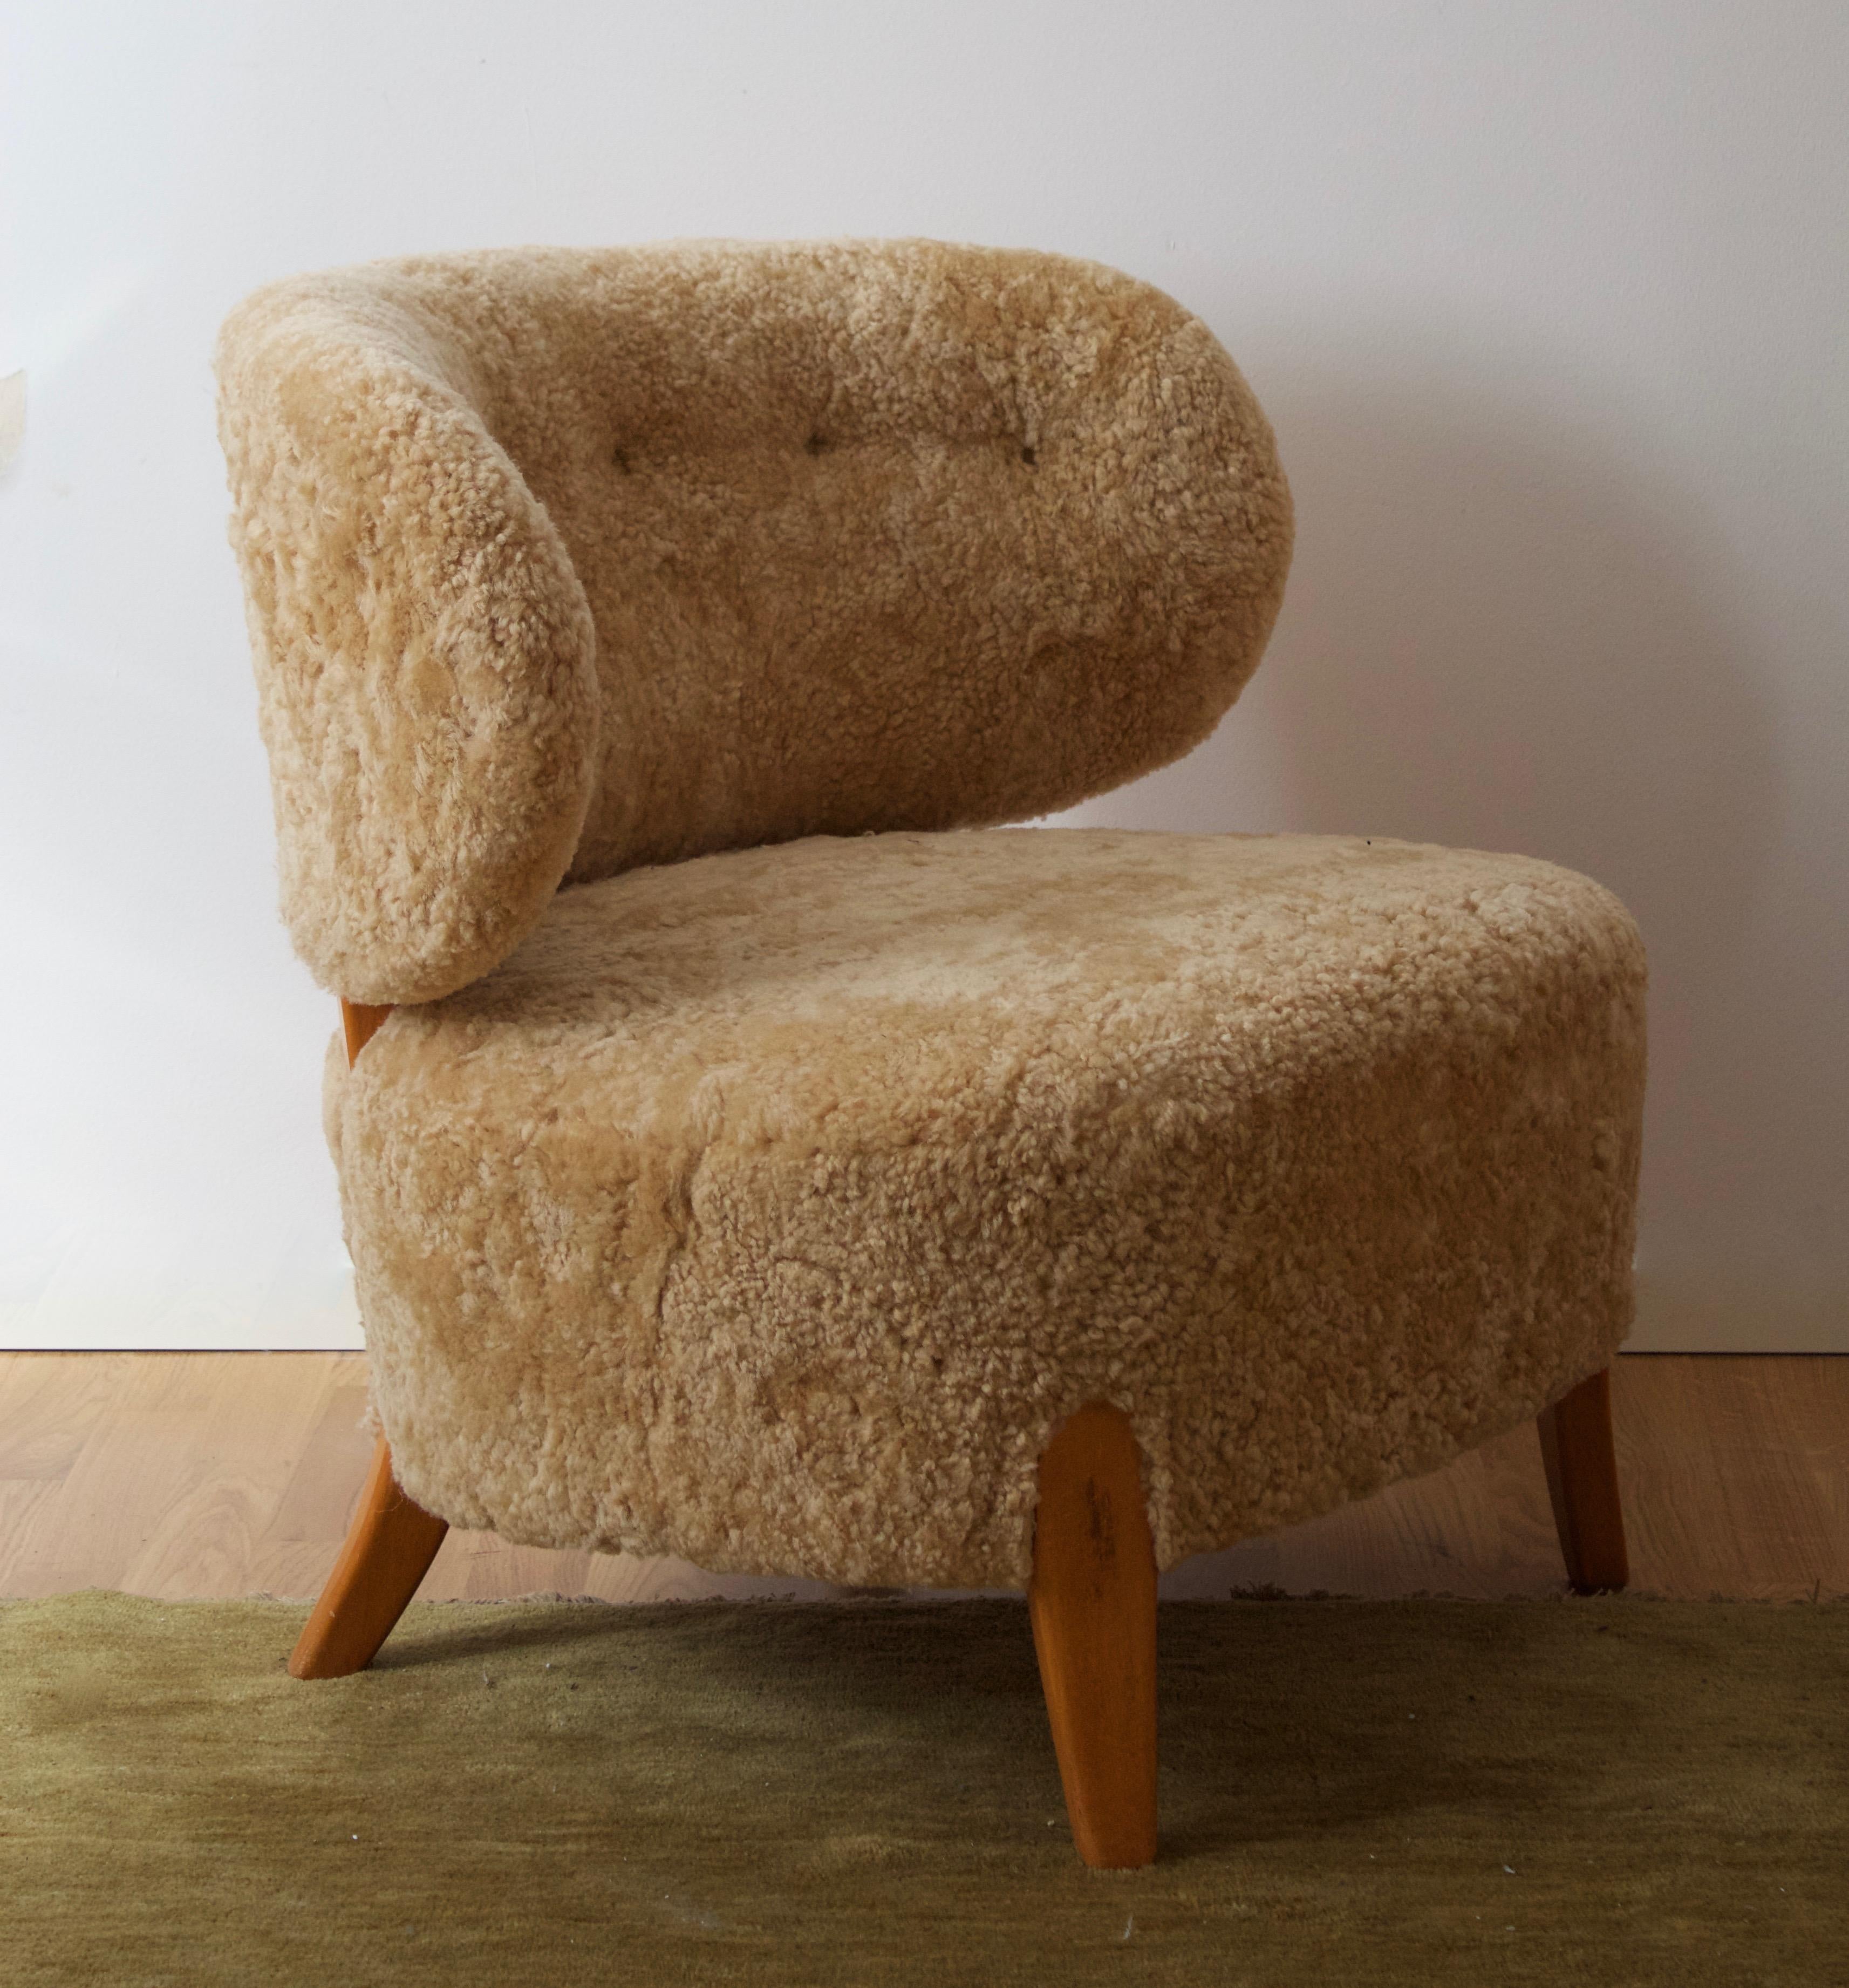 A pair of organic lounge chairs / slipper chairs by Otto Schulz, manufactured by Boet, Sweden.  

Other designers working in the organic style include Flemming Lassen, Philip Arctander, Gio Ponti, and Jean Royère.

  